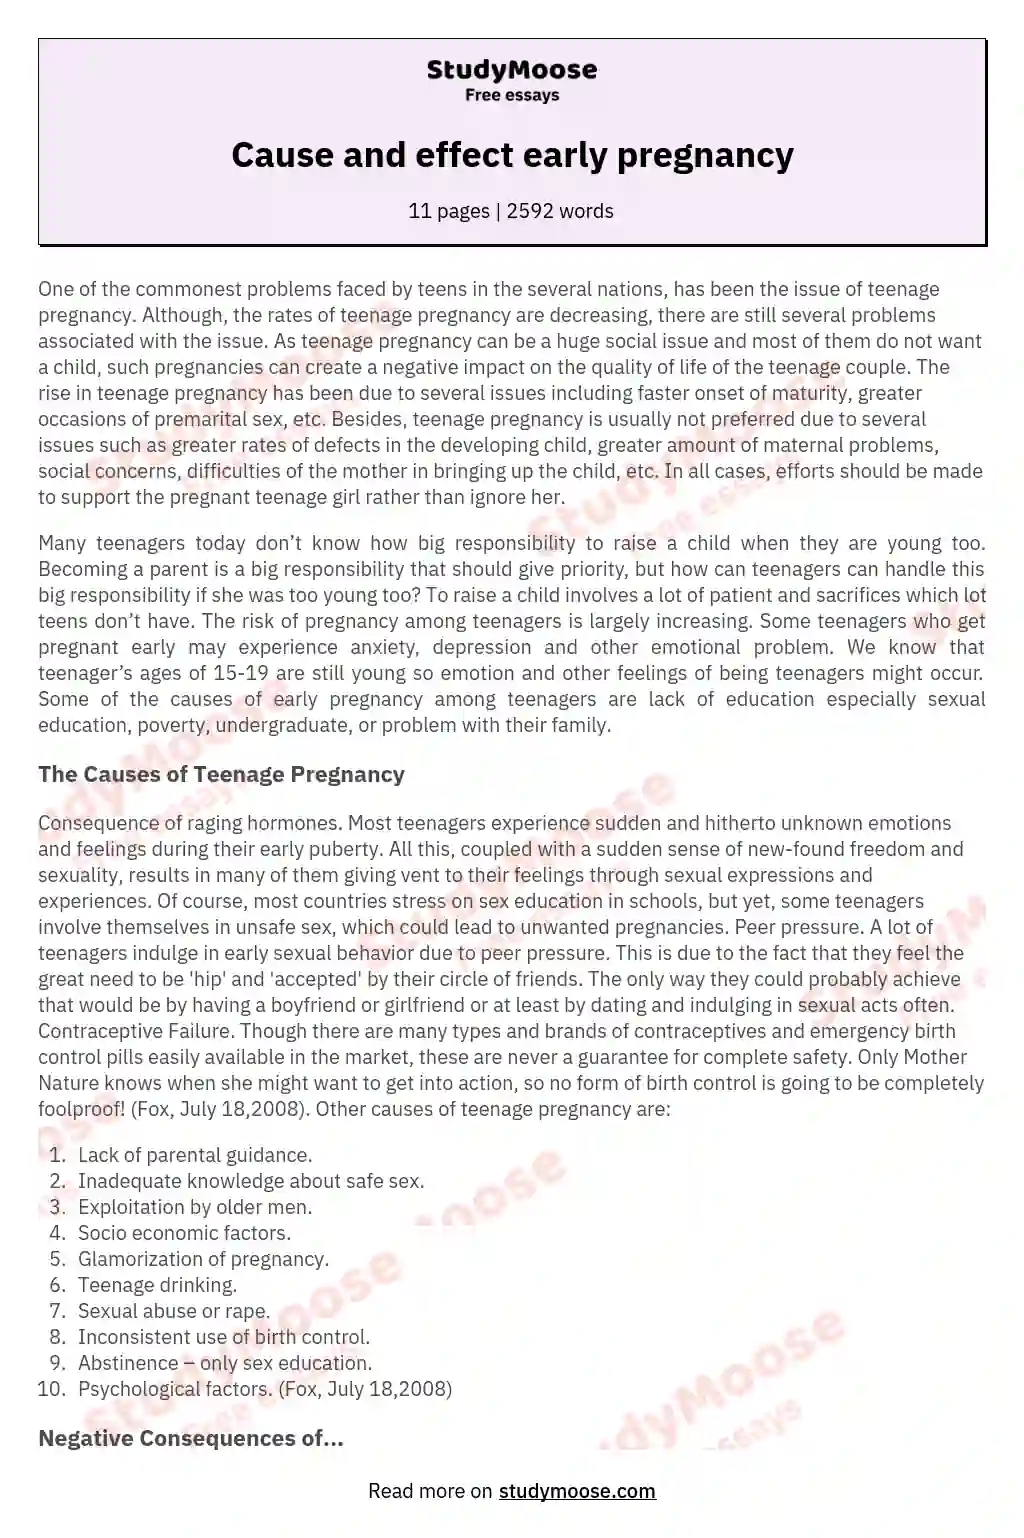 Cause and effect early pregnancy essay